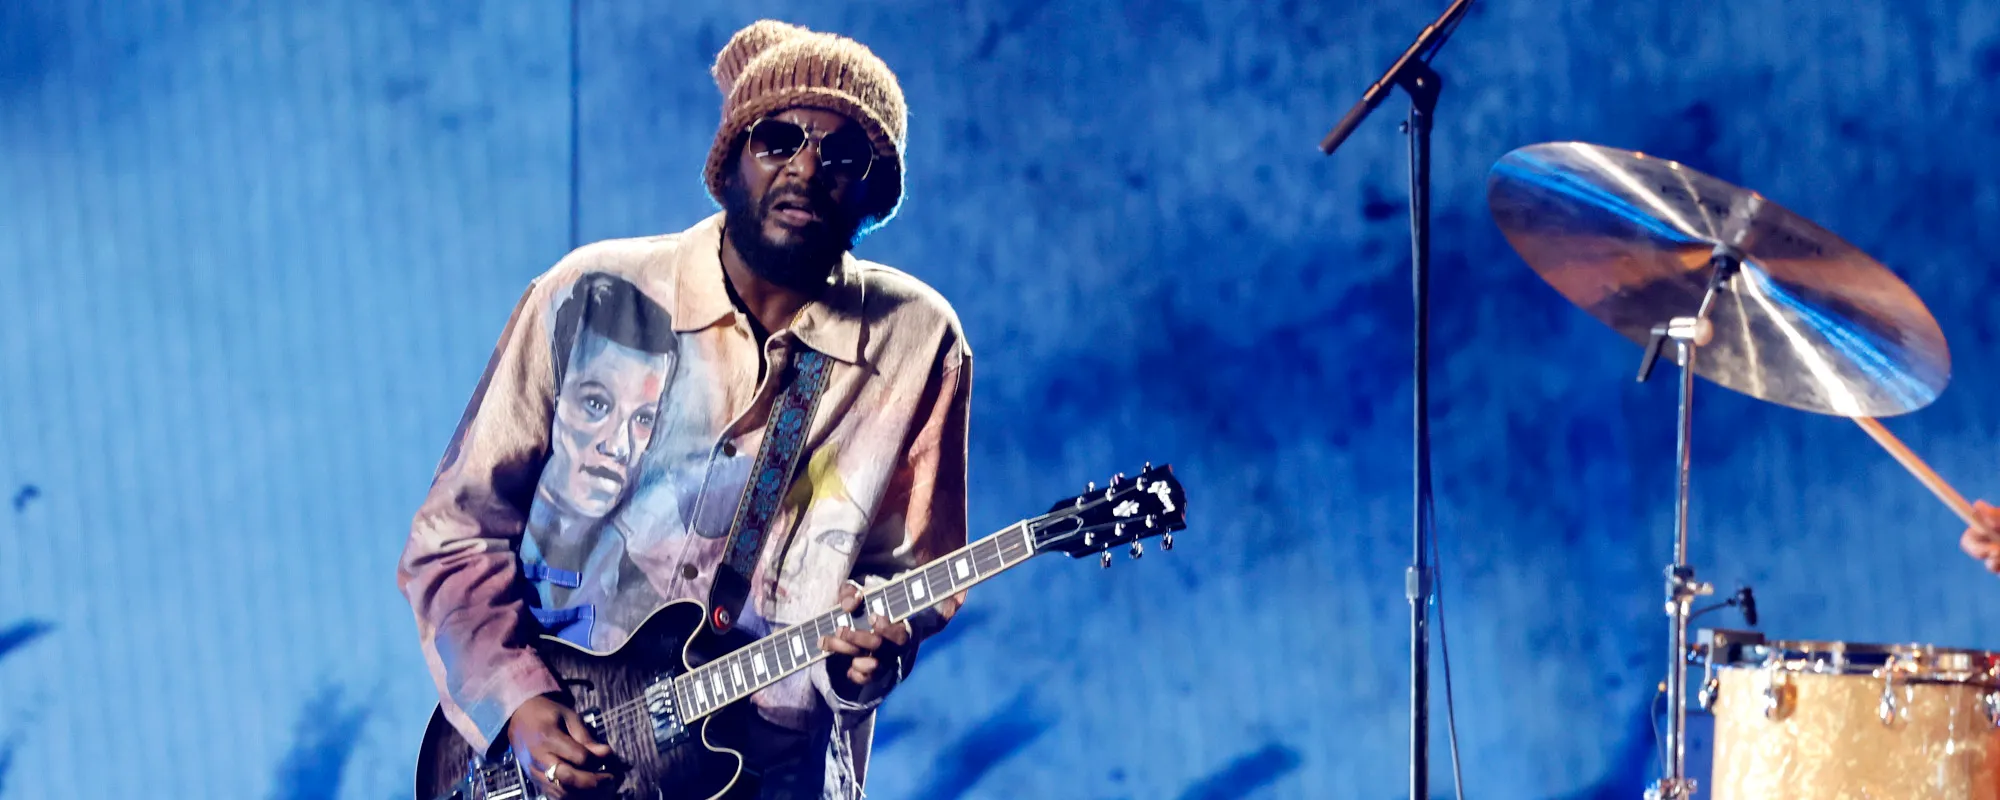 The Racist Confrontation that Inspired “This Land” by Gary Clark Jr.